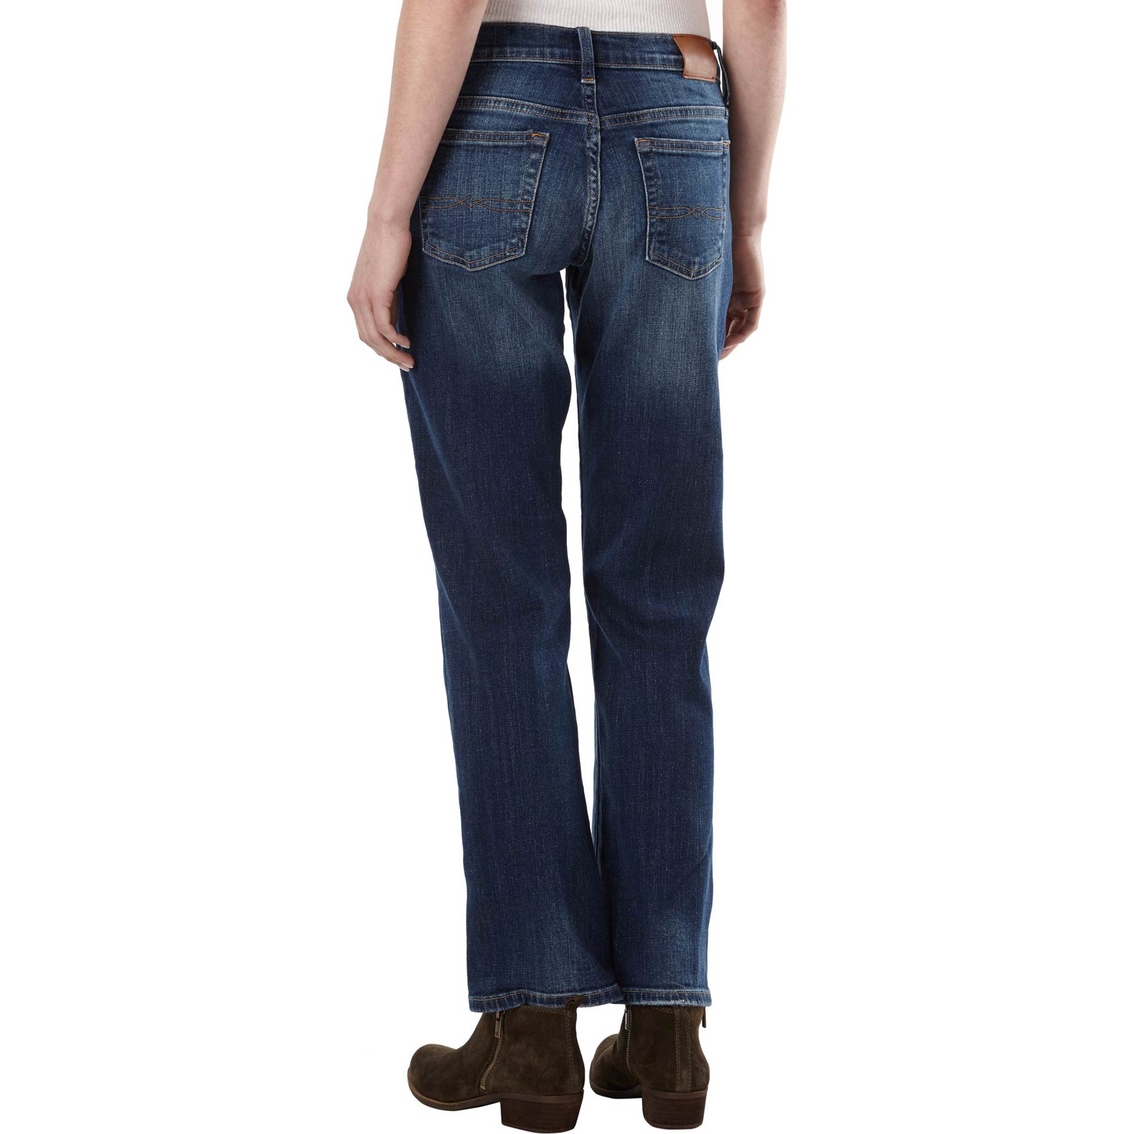 Lucky Brand Easy Rider Tanzanite Jeans - Image 2 of 2